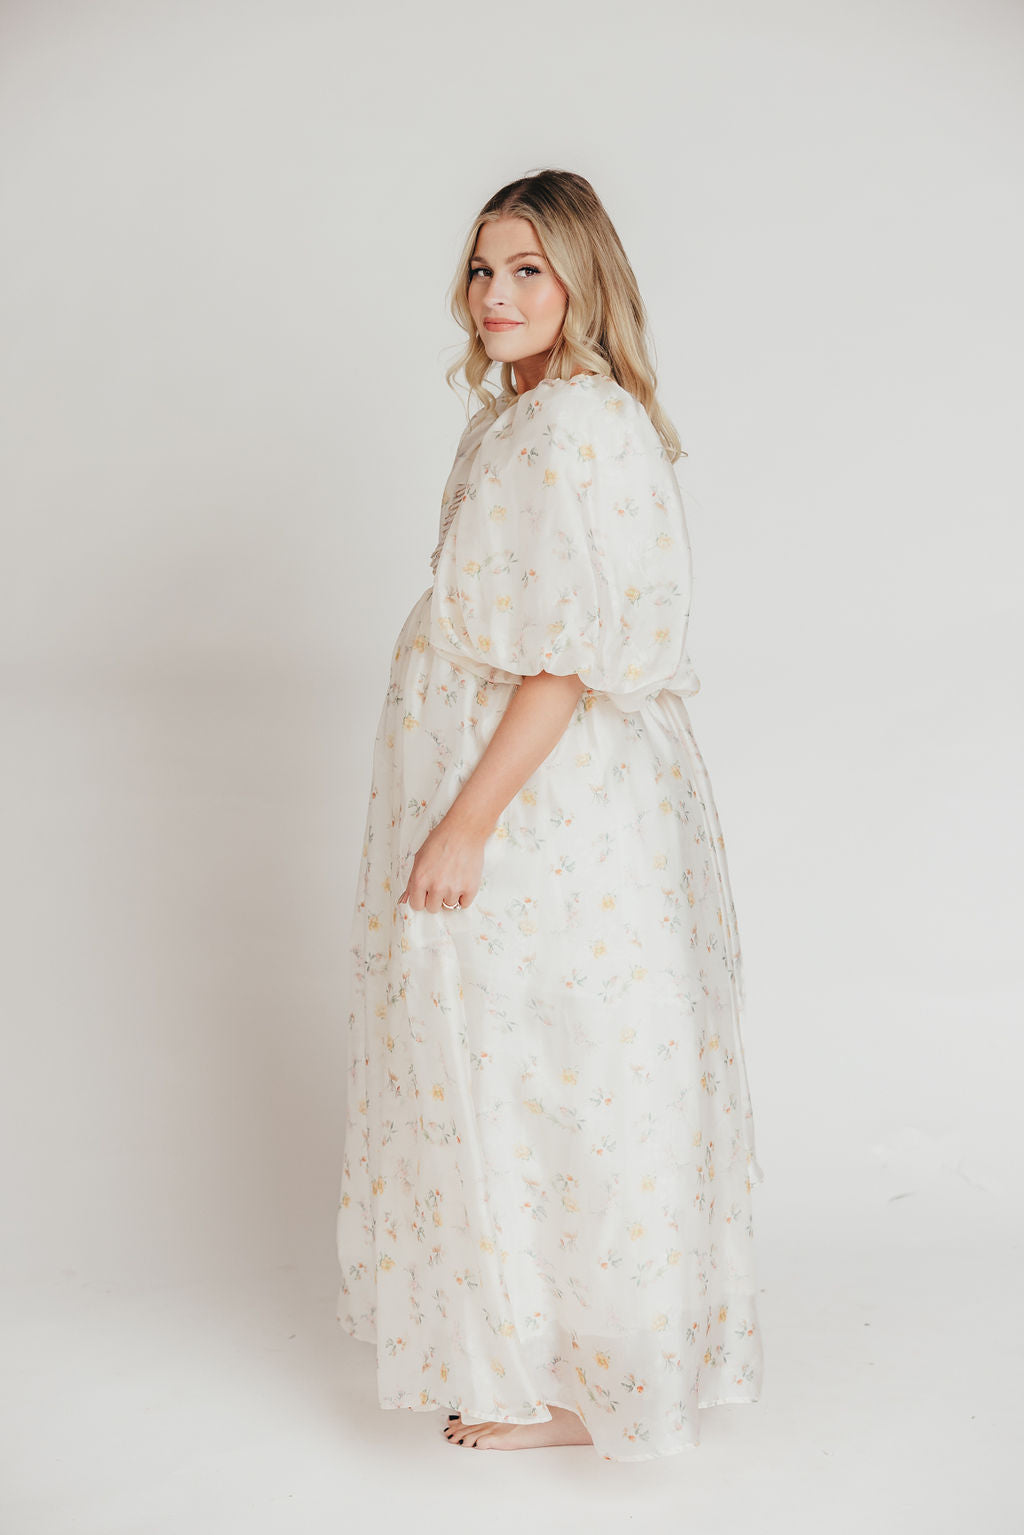 Melody Maxi Dress with Pleats and Bow Detail in Yellow Rose Floral - Bump Friendly & Inclusive Sizing (S-3XL) ($40 OFF THIS WEEK)